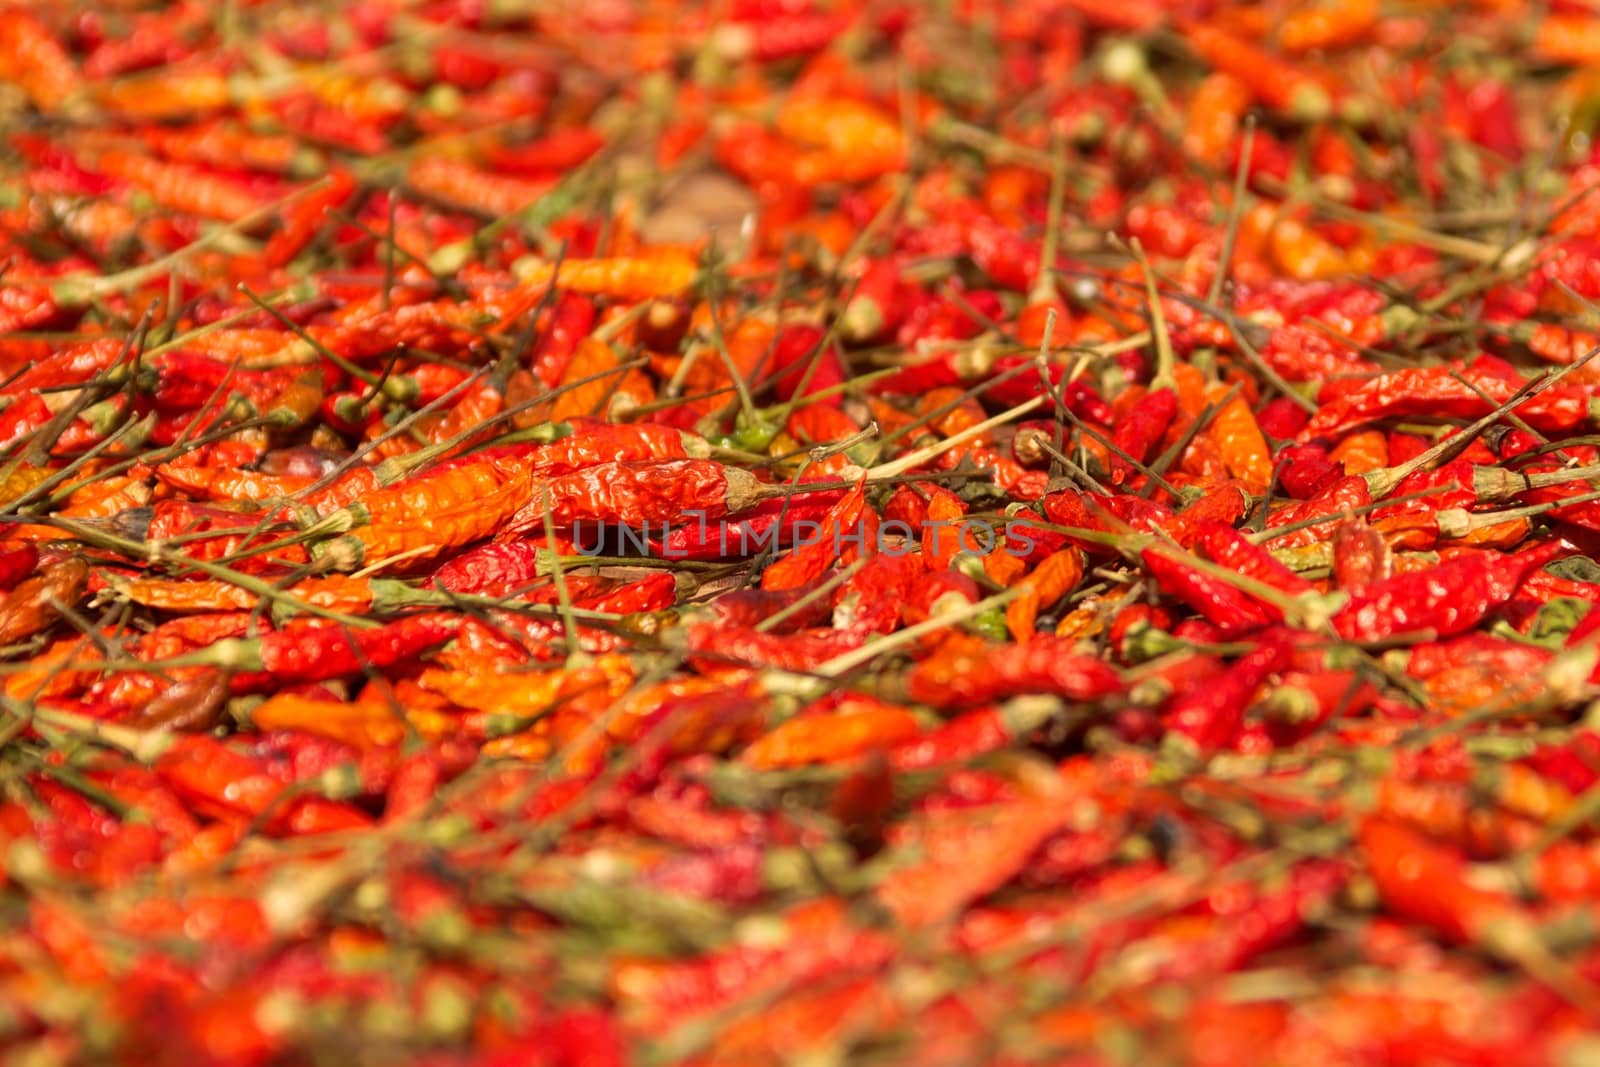 Red chilli peppers drying on the sun. Low angle, shallow depth of field.